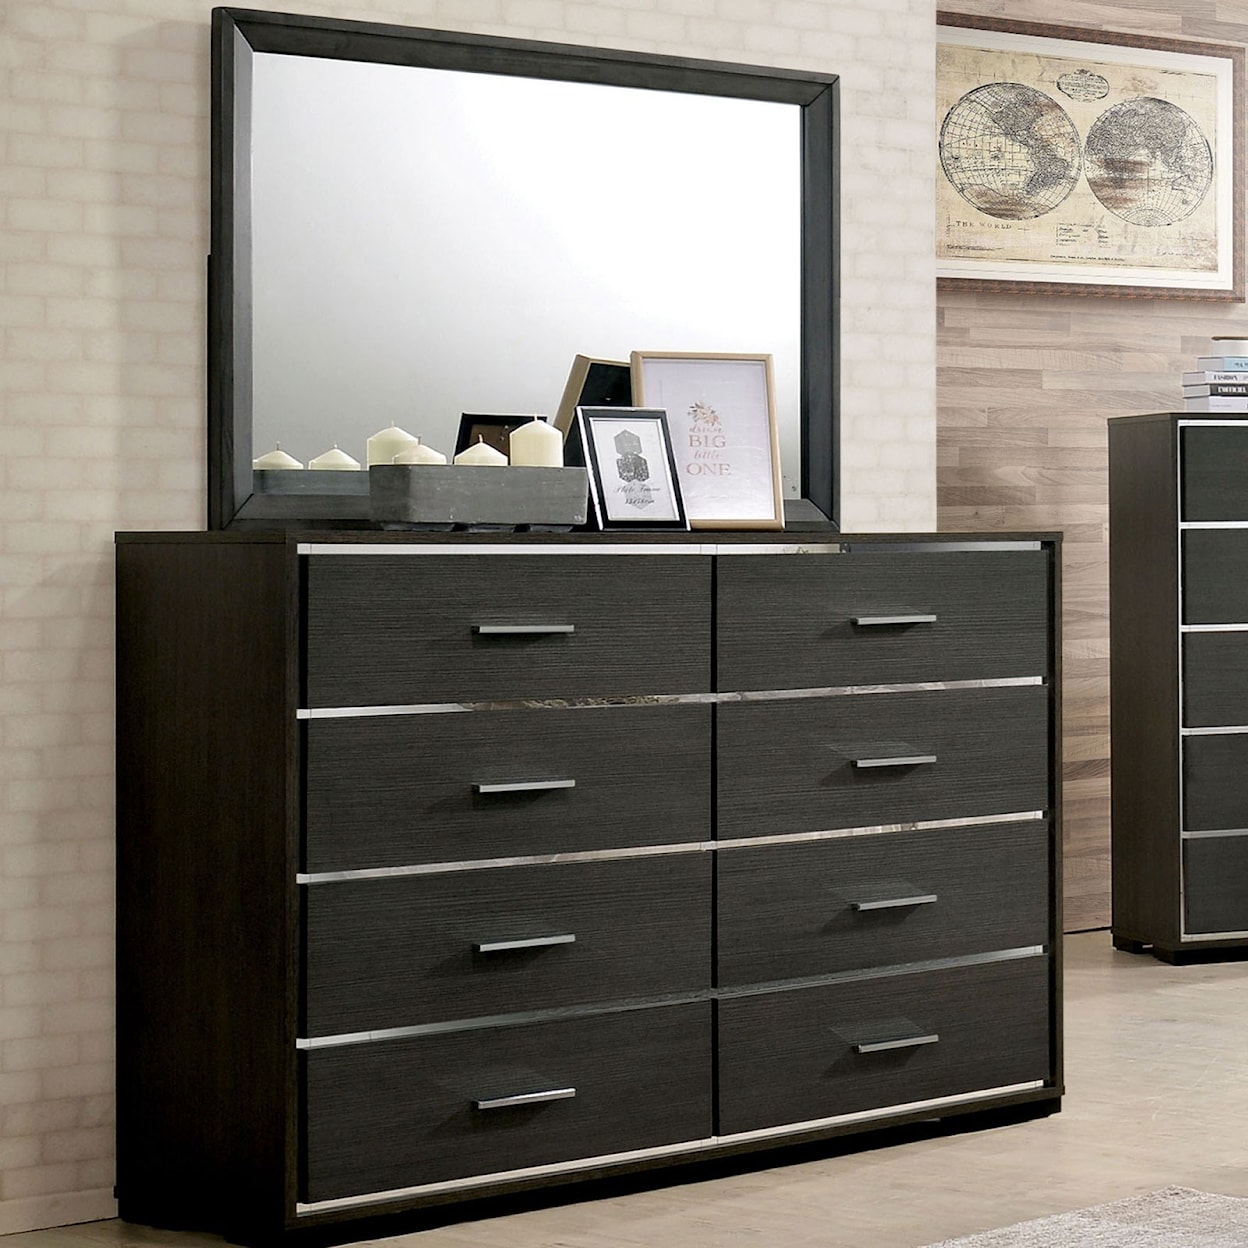 Furniture of America Camryn Dresser and Mirror Combination